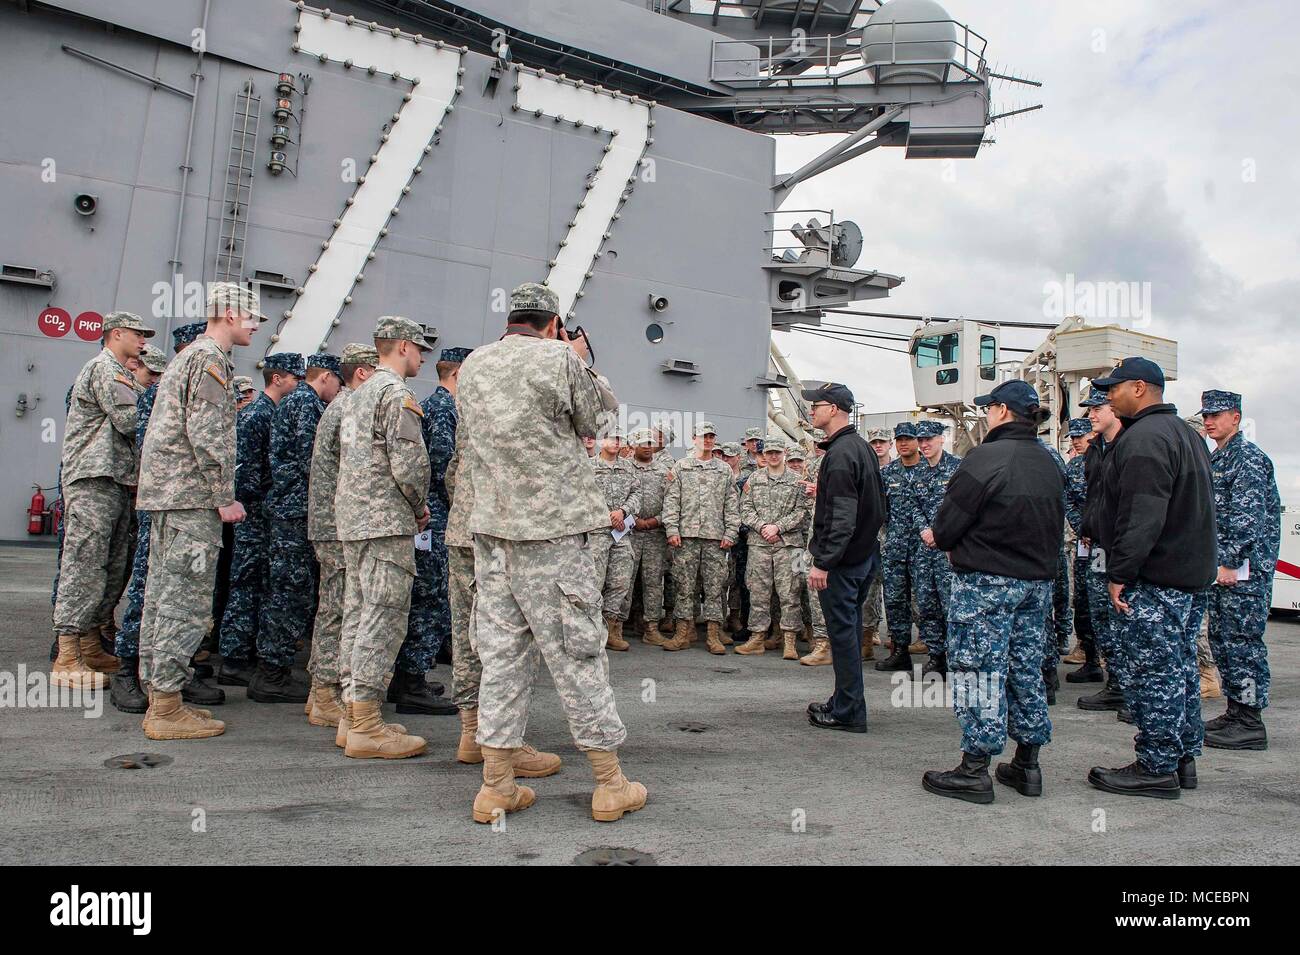 180410-N-JC445-0046 NORFOLK, Va (April 10, 2018) Senior Chief Mass Communication Specialist Mike Jones, from Keflavik, Iceland, speaks to cadets and midshipmen from the Virginia Military Institute (VMI) during a tour aboard the aircraft carrier USS George H.W. Bush (CVN 77). The ship is in port in Norfolk, Virginia, conducting sustainment exercises to maintain carrier readiness.  (U.S. Navy photo by Mass Communication Specialist 3rd Class Mario Coto) Stock Photo